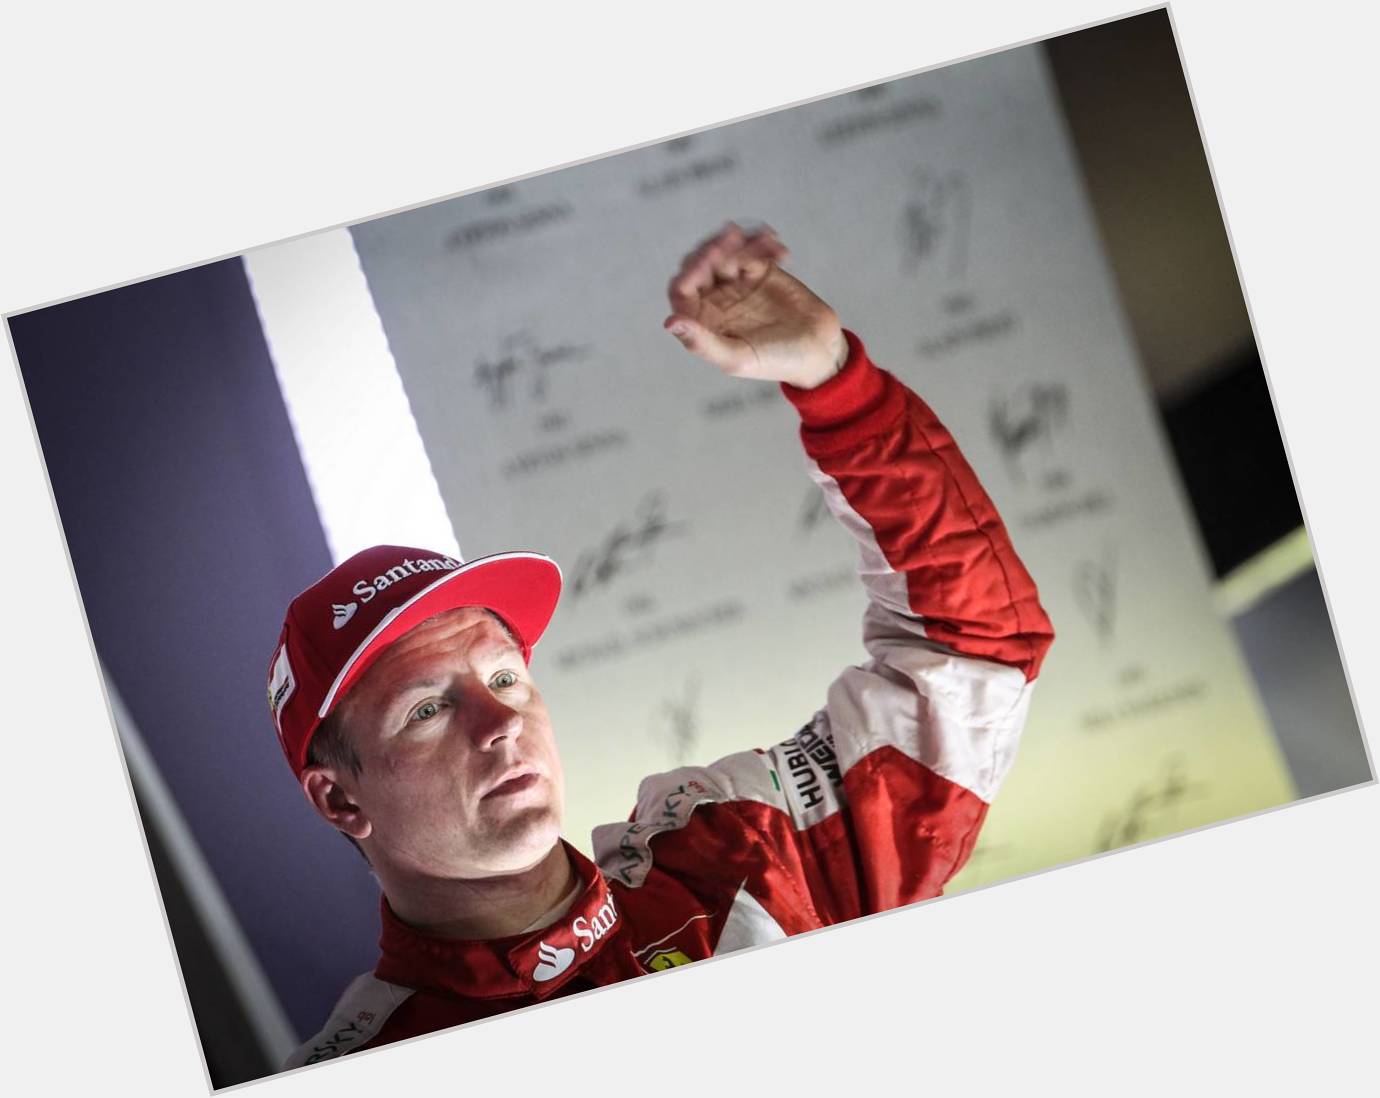 Hands up if it is your birthday today? Happy birthday to Kimi Raikkonen who turns 36! 